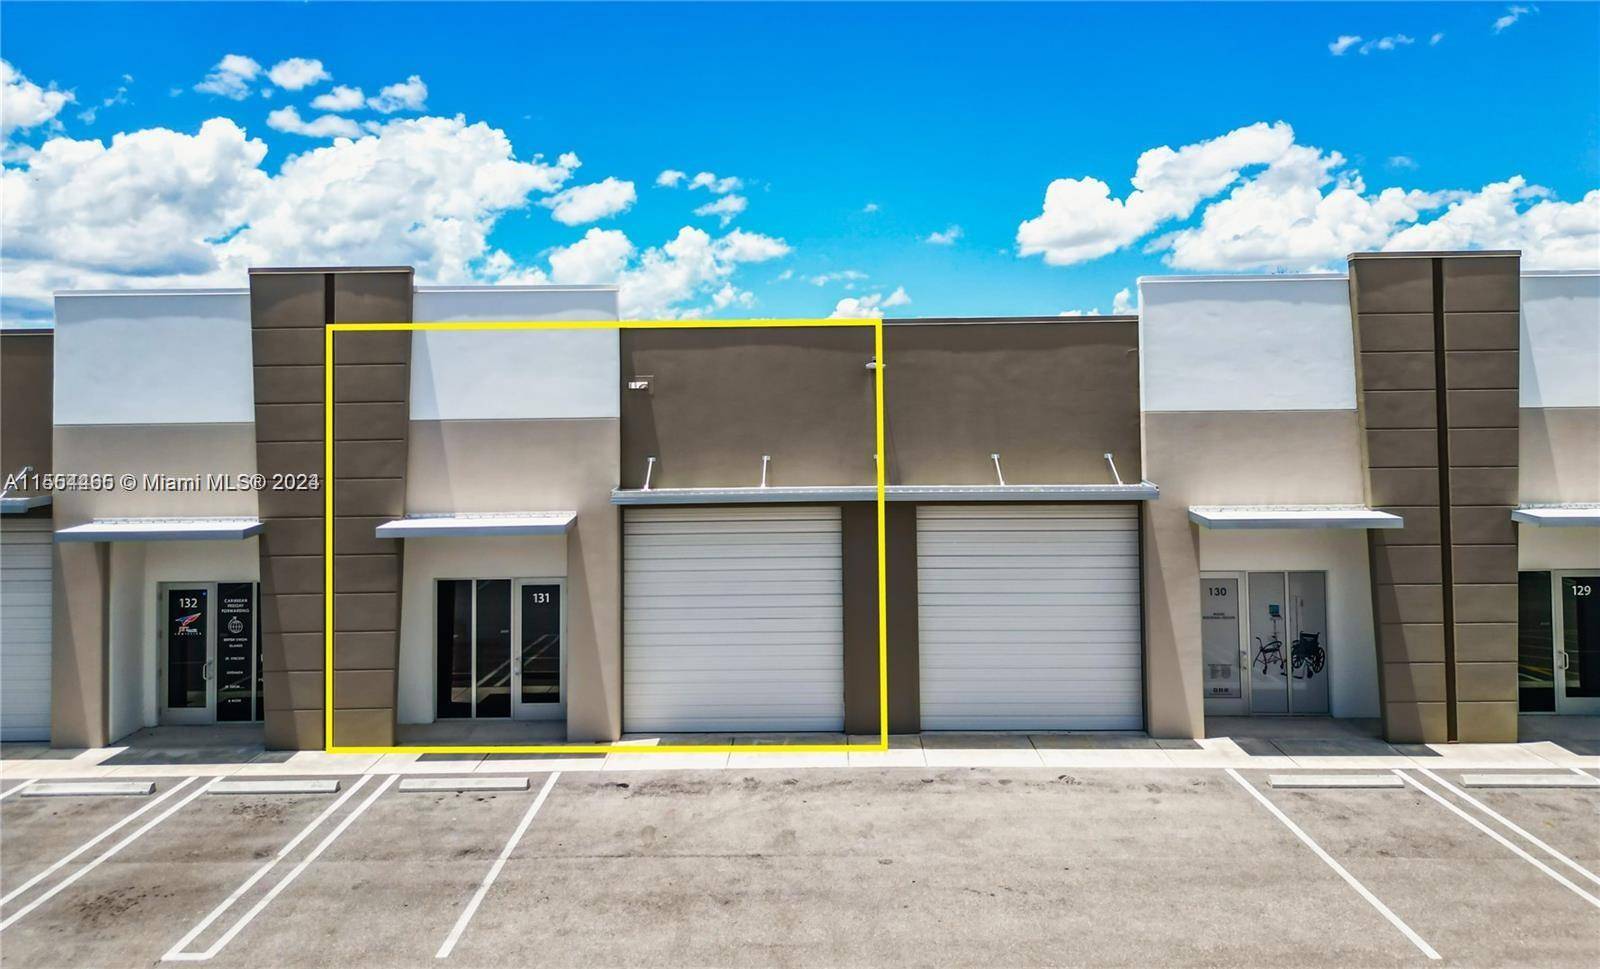 Newer Construction Industrial Flex Space Condo for Lease Warehouse features a private office space with reception area, 18 ft ceilings, glass storefront, shared parking spaces, bathroom, modern lighting grade level ...